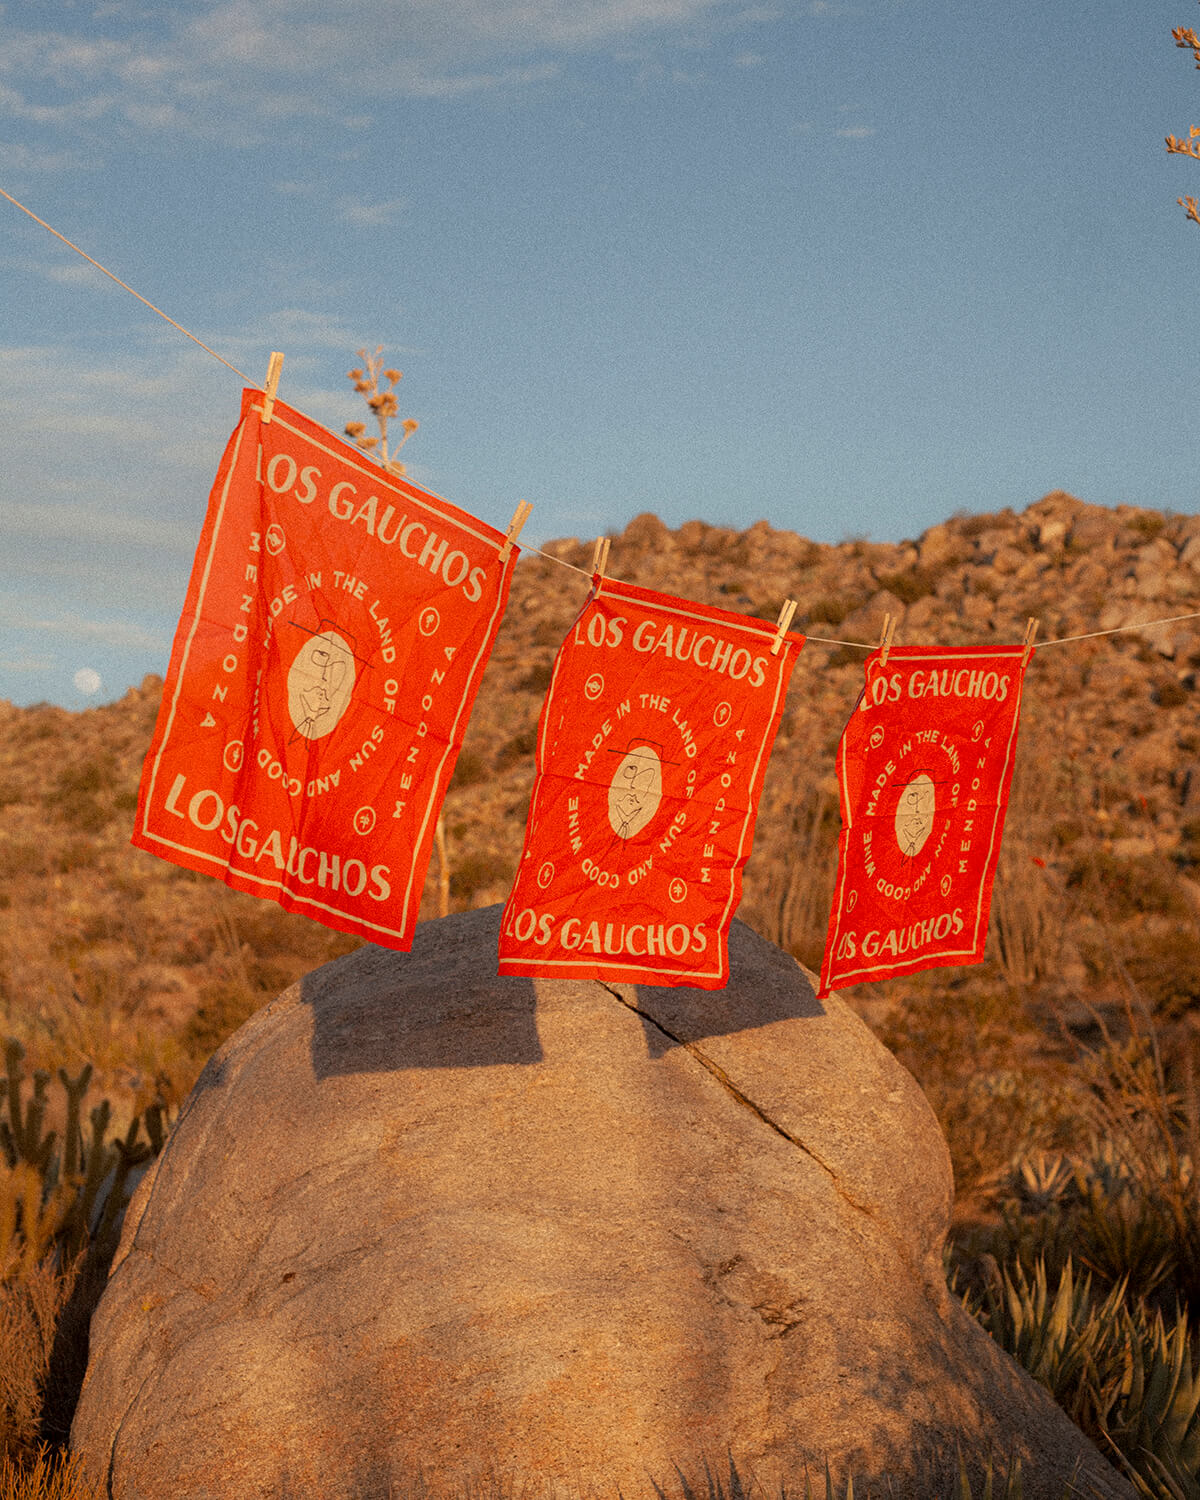 Featured product image displaying Los Gaucho's Bandana